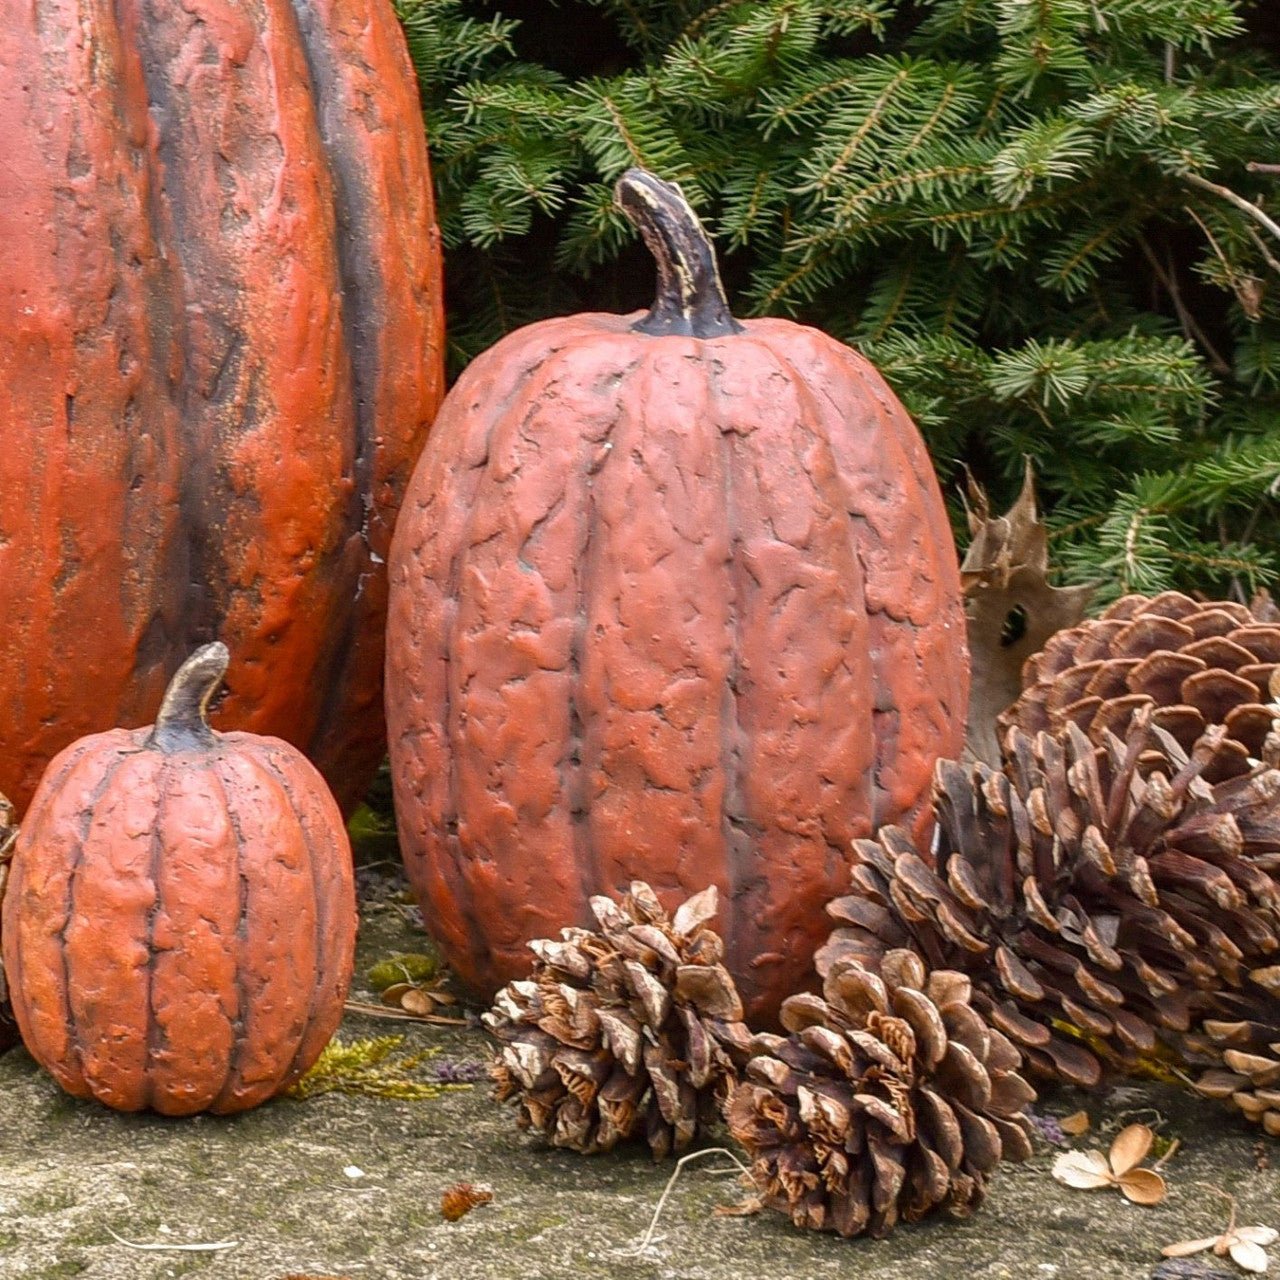 Pumpkin spice and everything nice. Fall decor on Sale now. - The Primitive Pineapple Collection